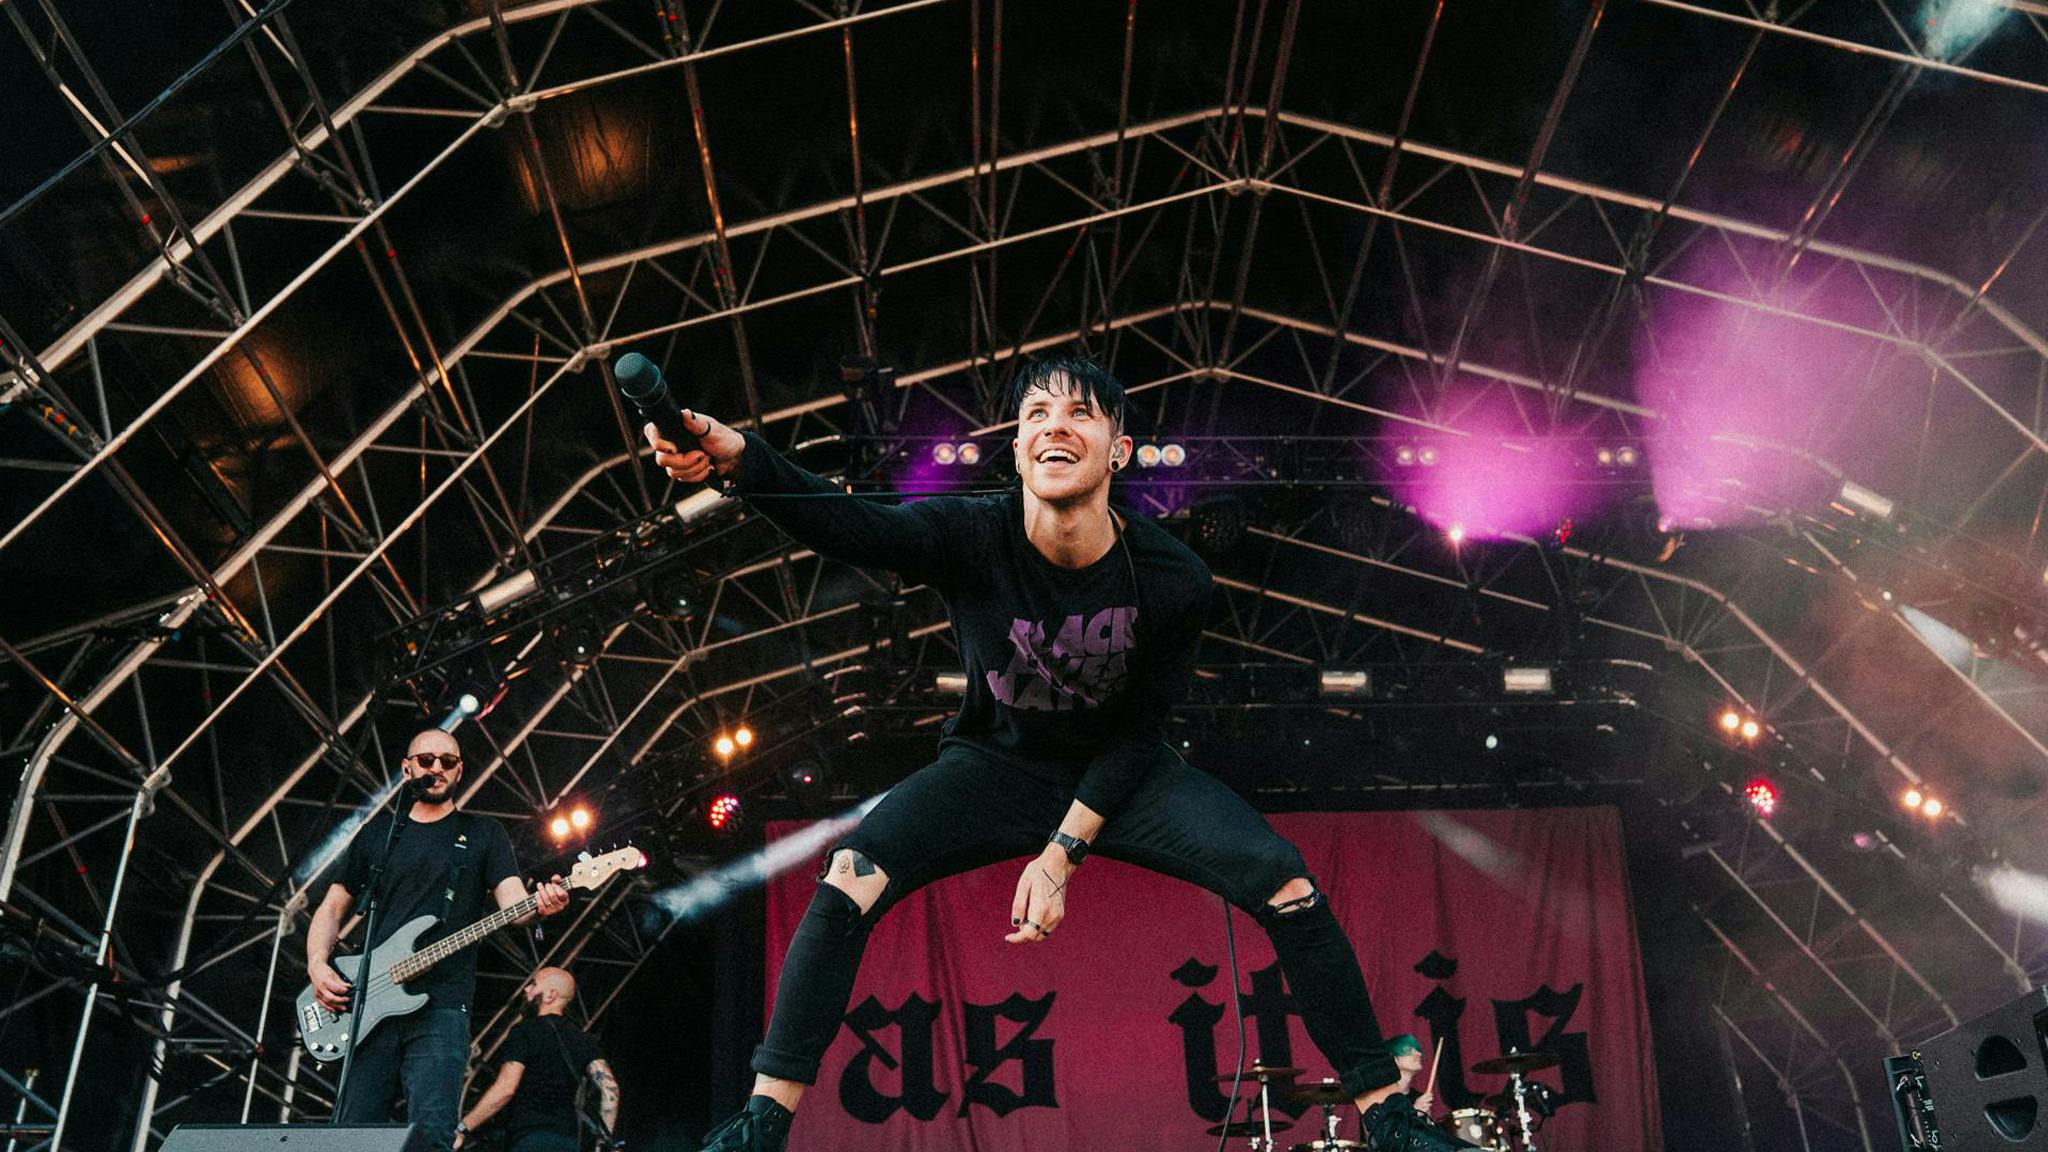 Patty Walters announces As It Is hiatus: “Music is not currently at the forefront of my life”